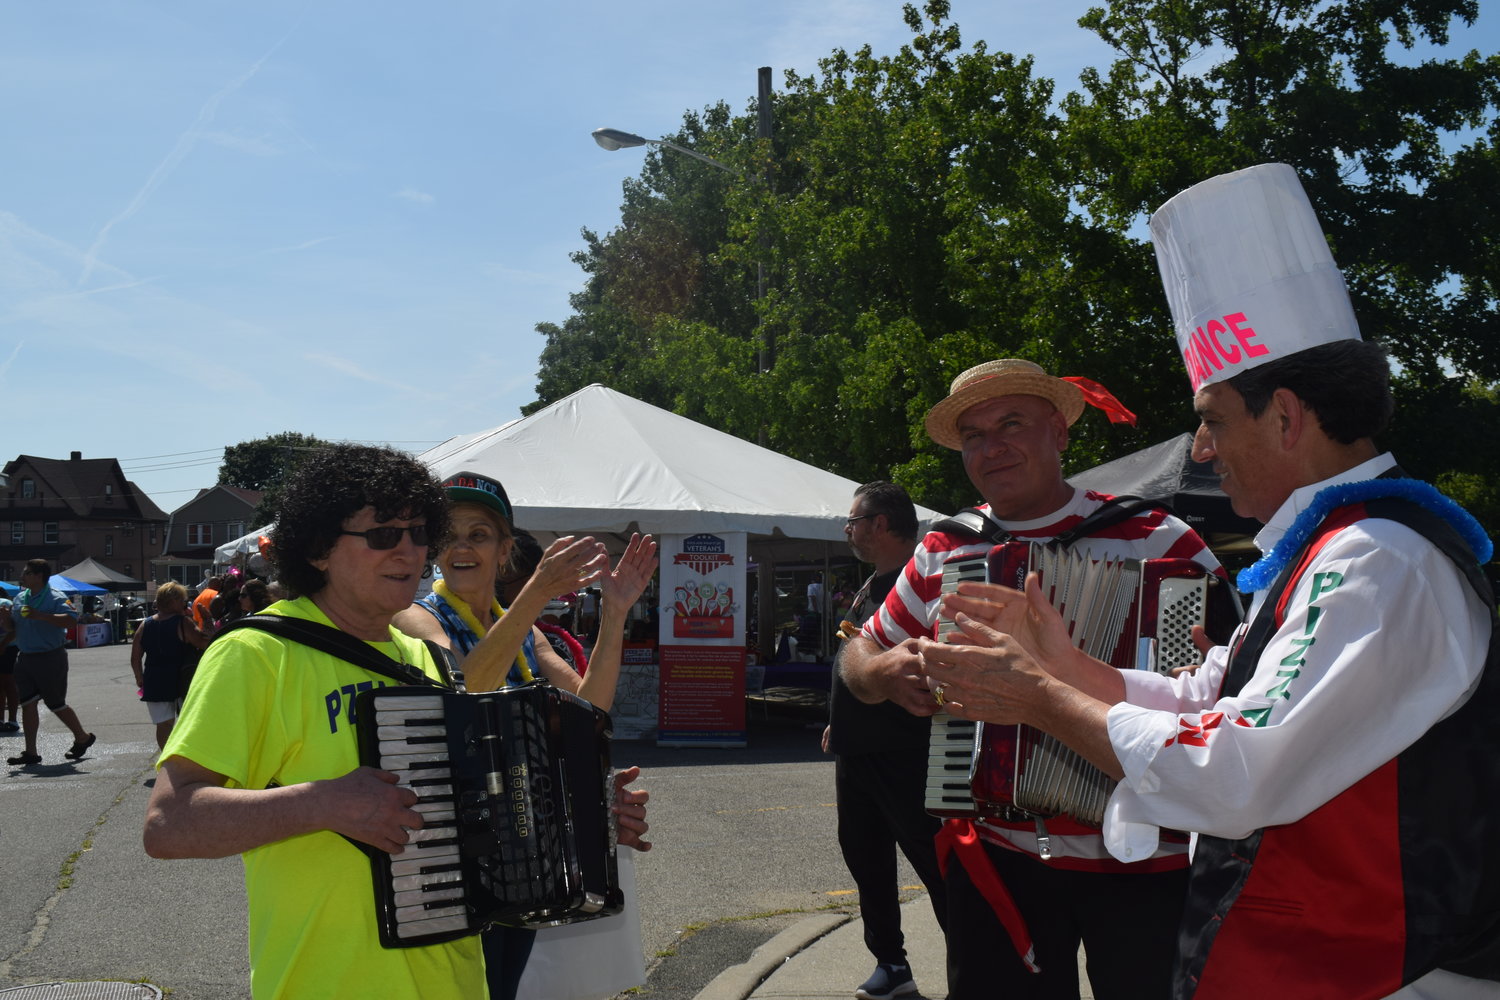 The Pizza Dance band of Amelio Morelli, left, Nino Gugliemo and Tony Modica performed throughout the fair.